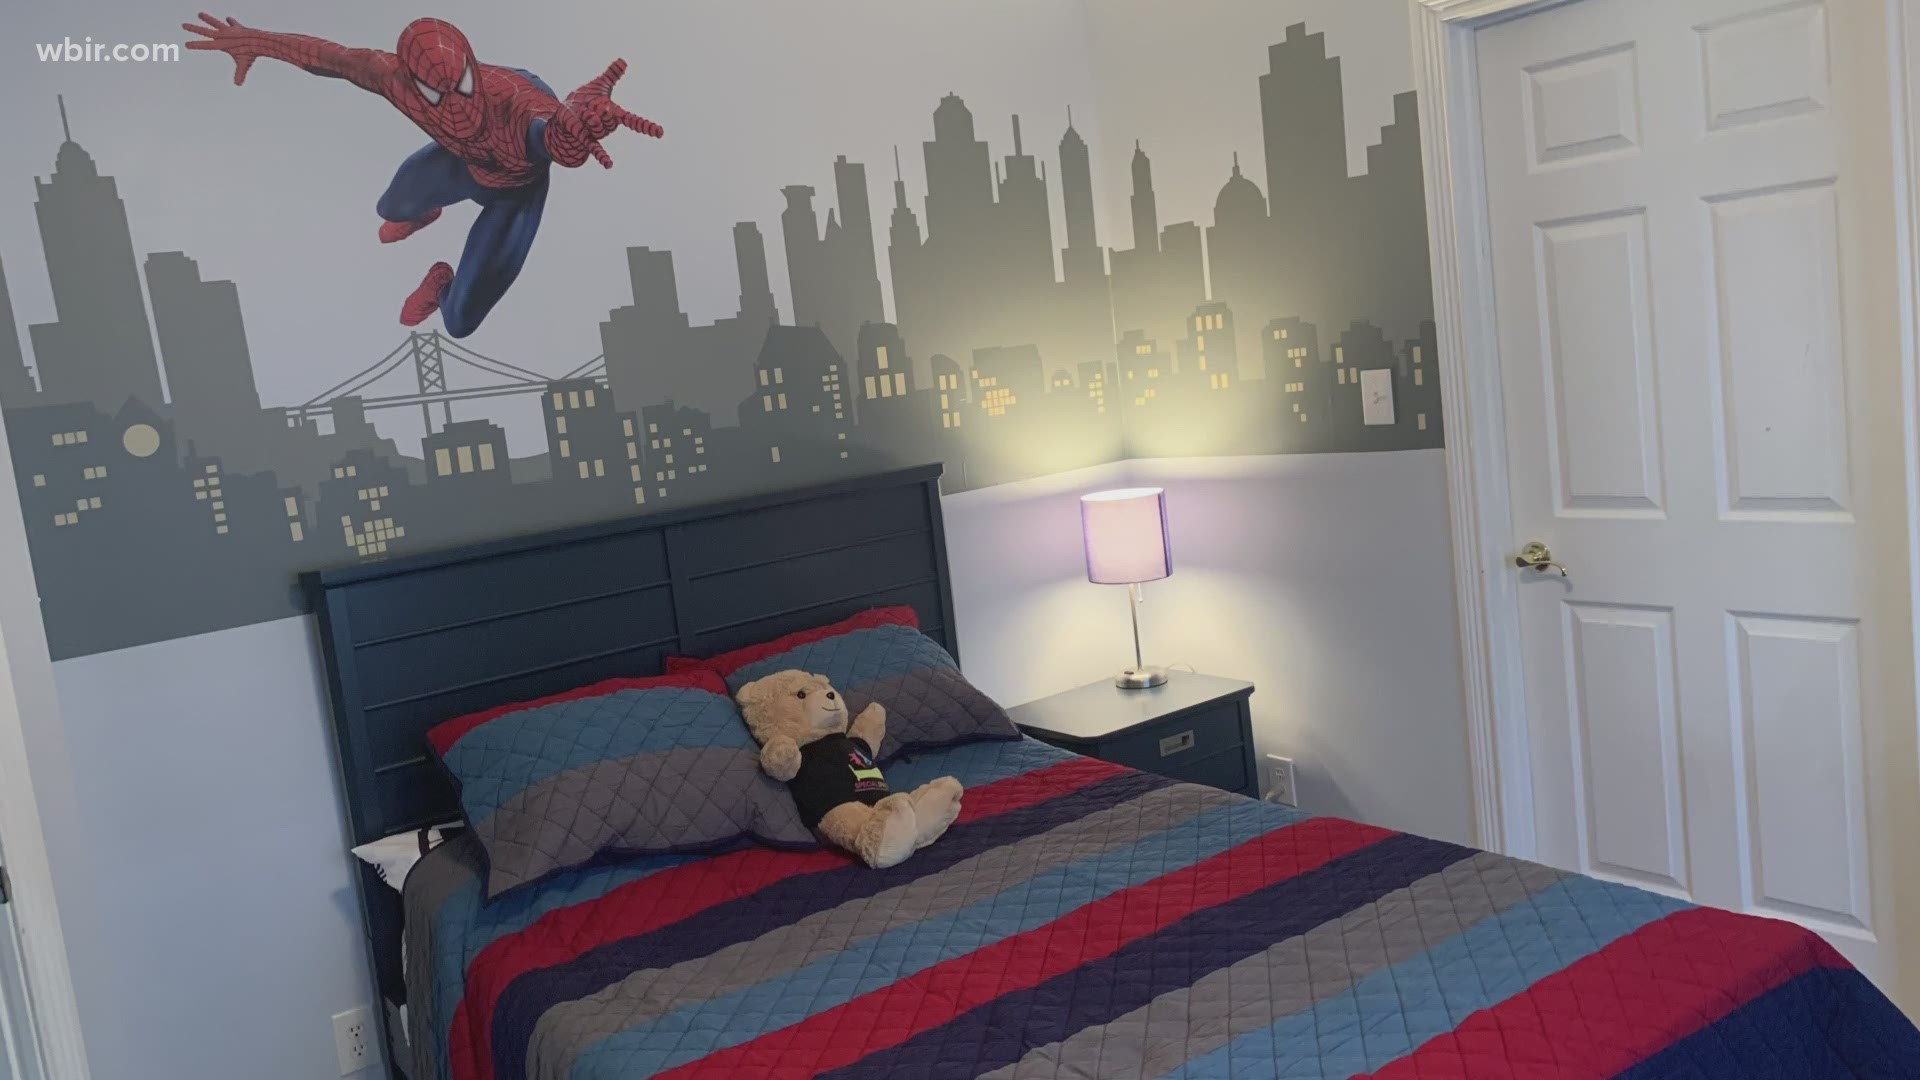 Noah Sileno fought cancer for 830 days. After he took his last dose of chemotherapy, he also got a new room for superheroes like him.